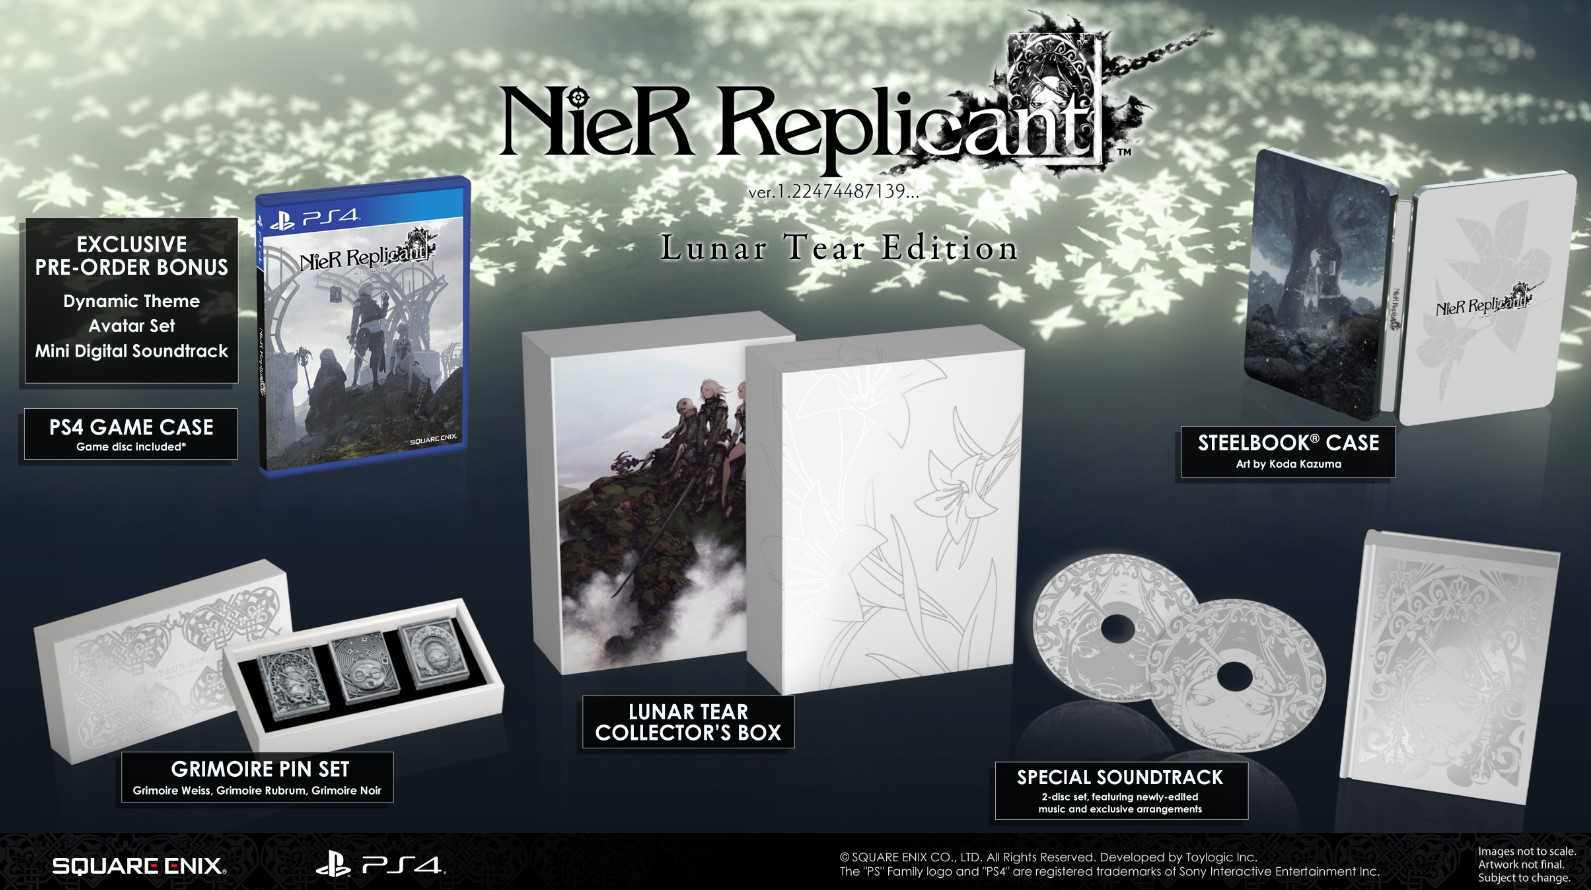 Nier Replicant Lunar Tear Edition Will Be Available In The Philippines Price Revealed One More Game